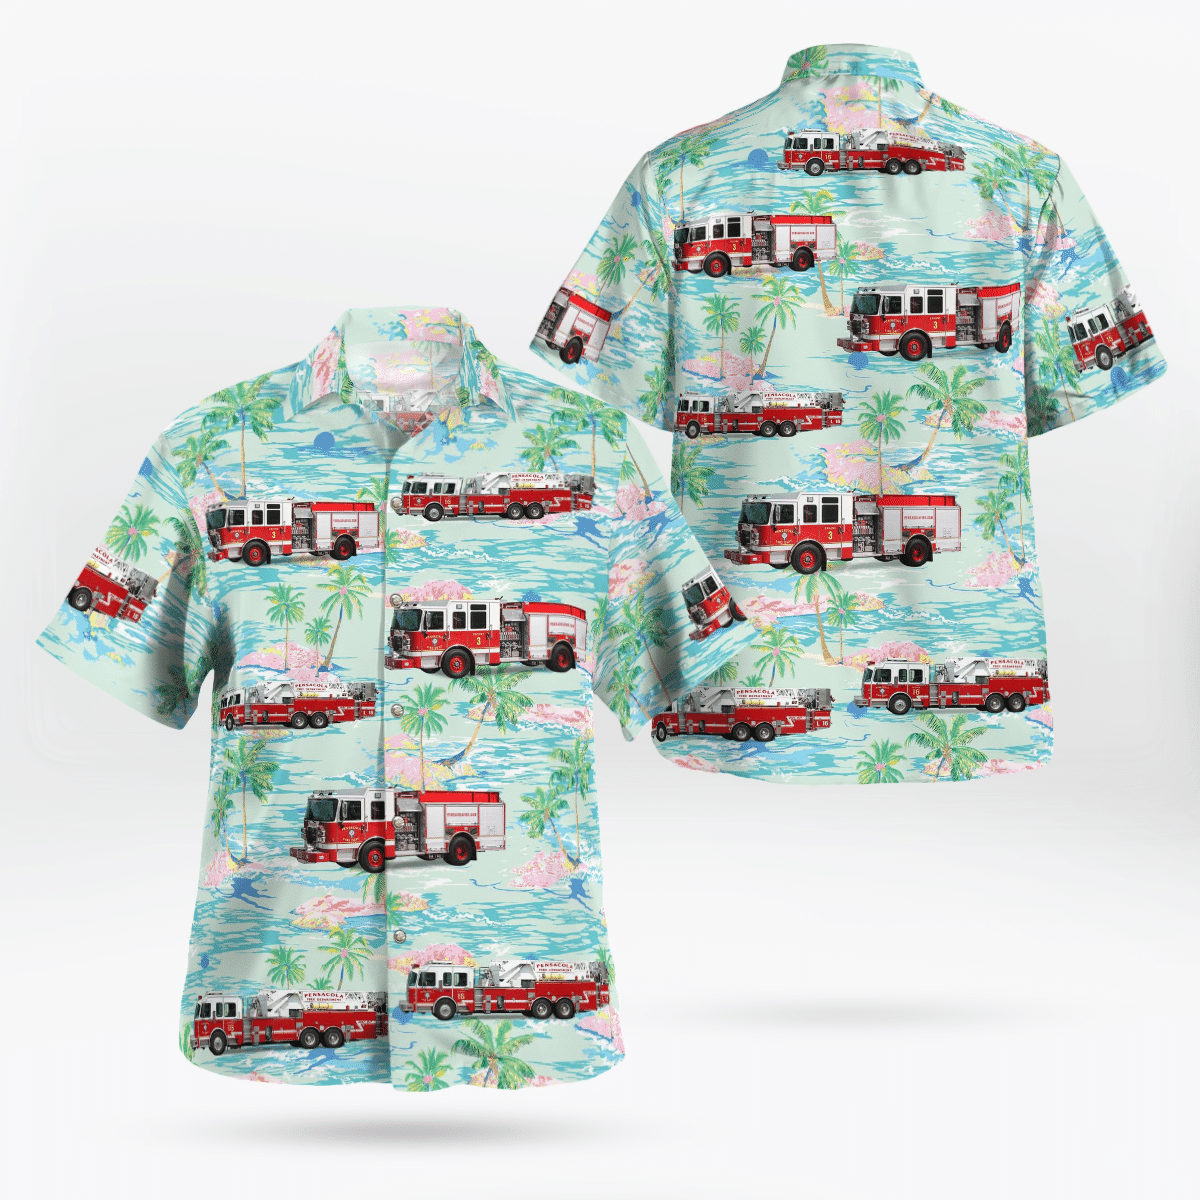 If you are in need of a new summertime look, pick up this Hawaiian shirt 107